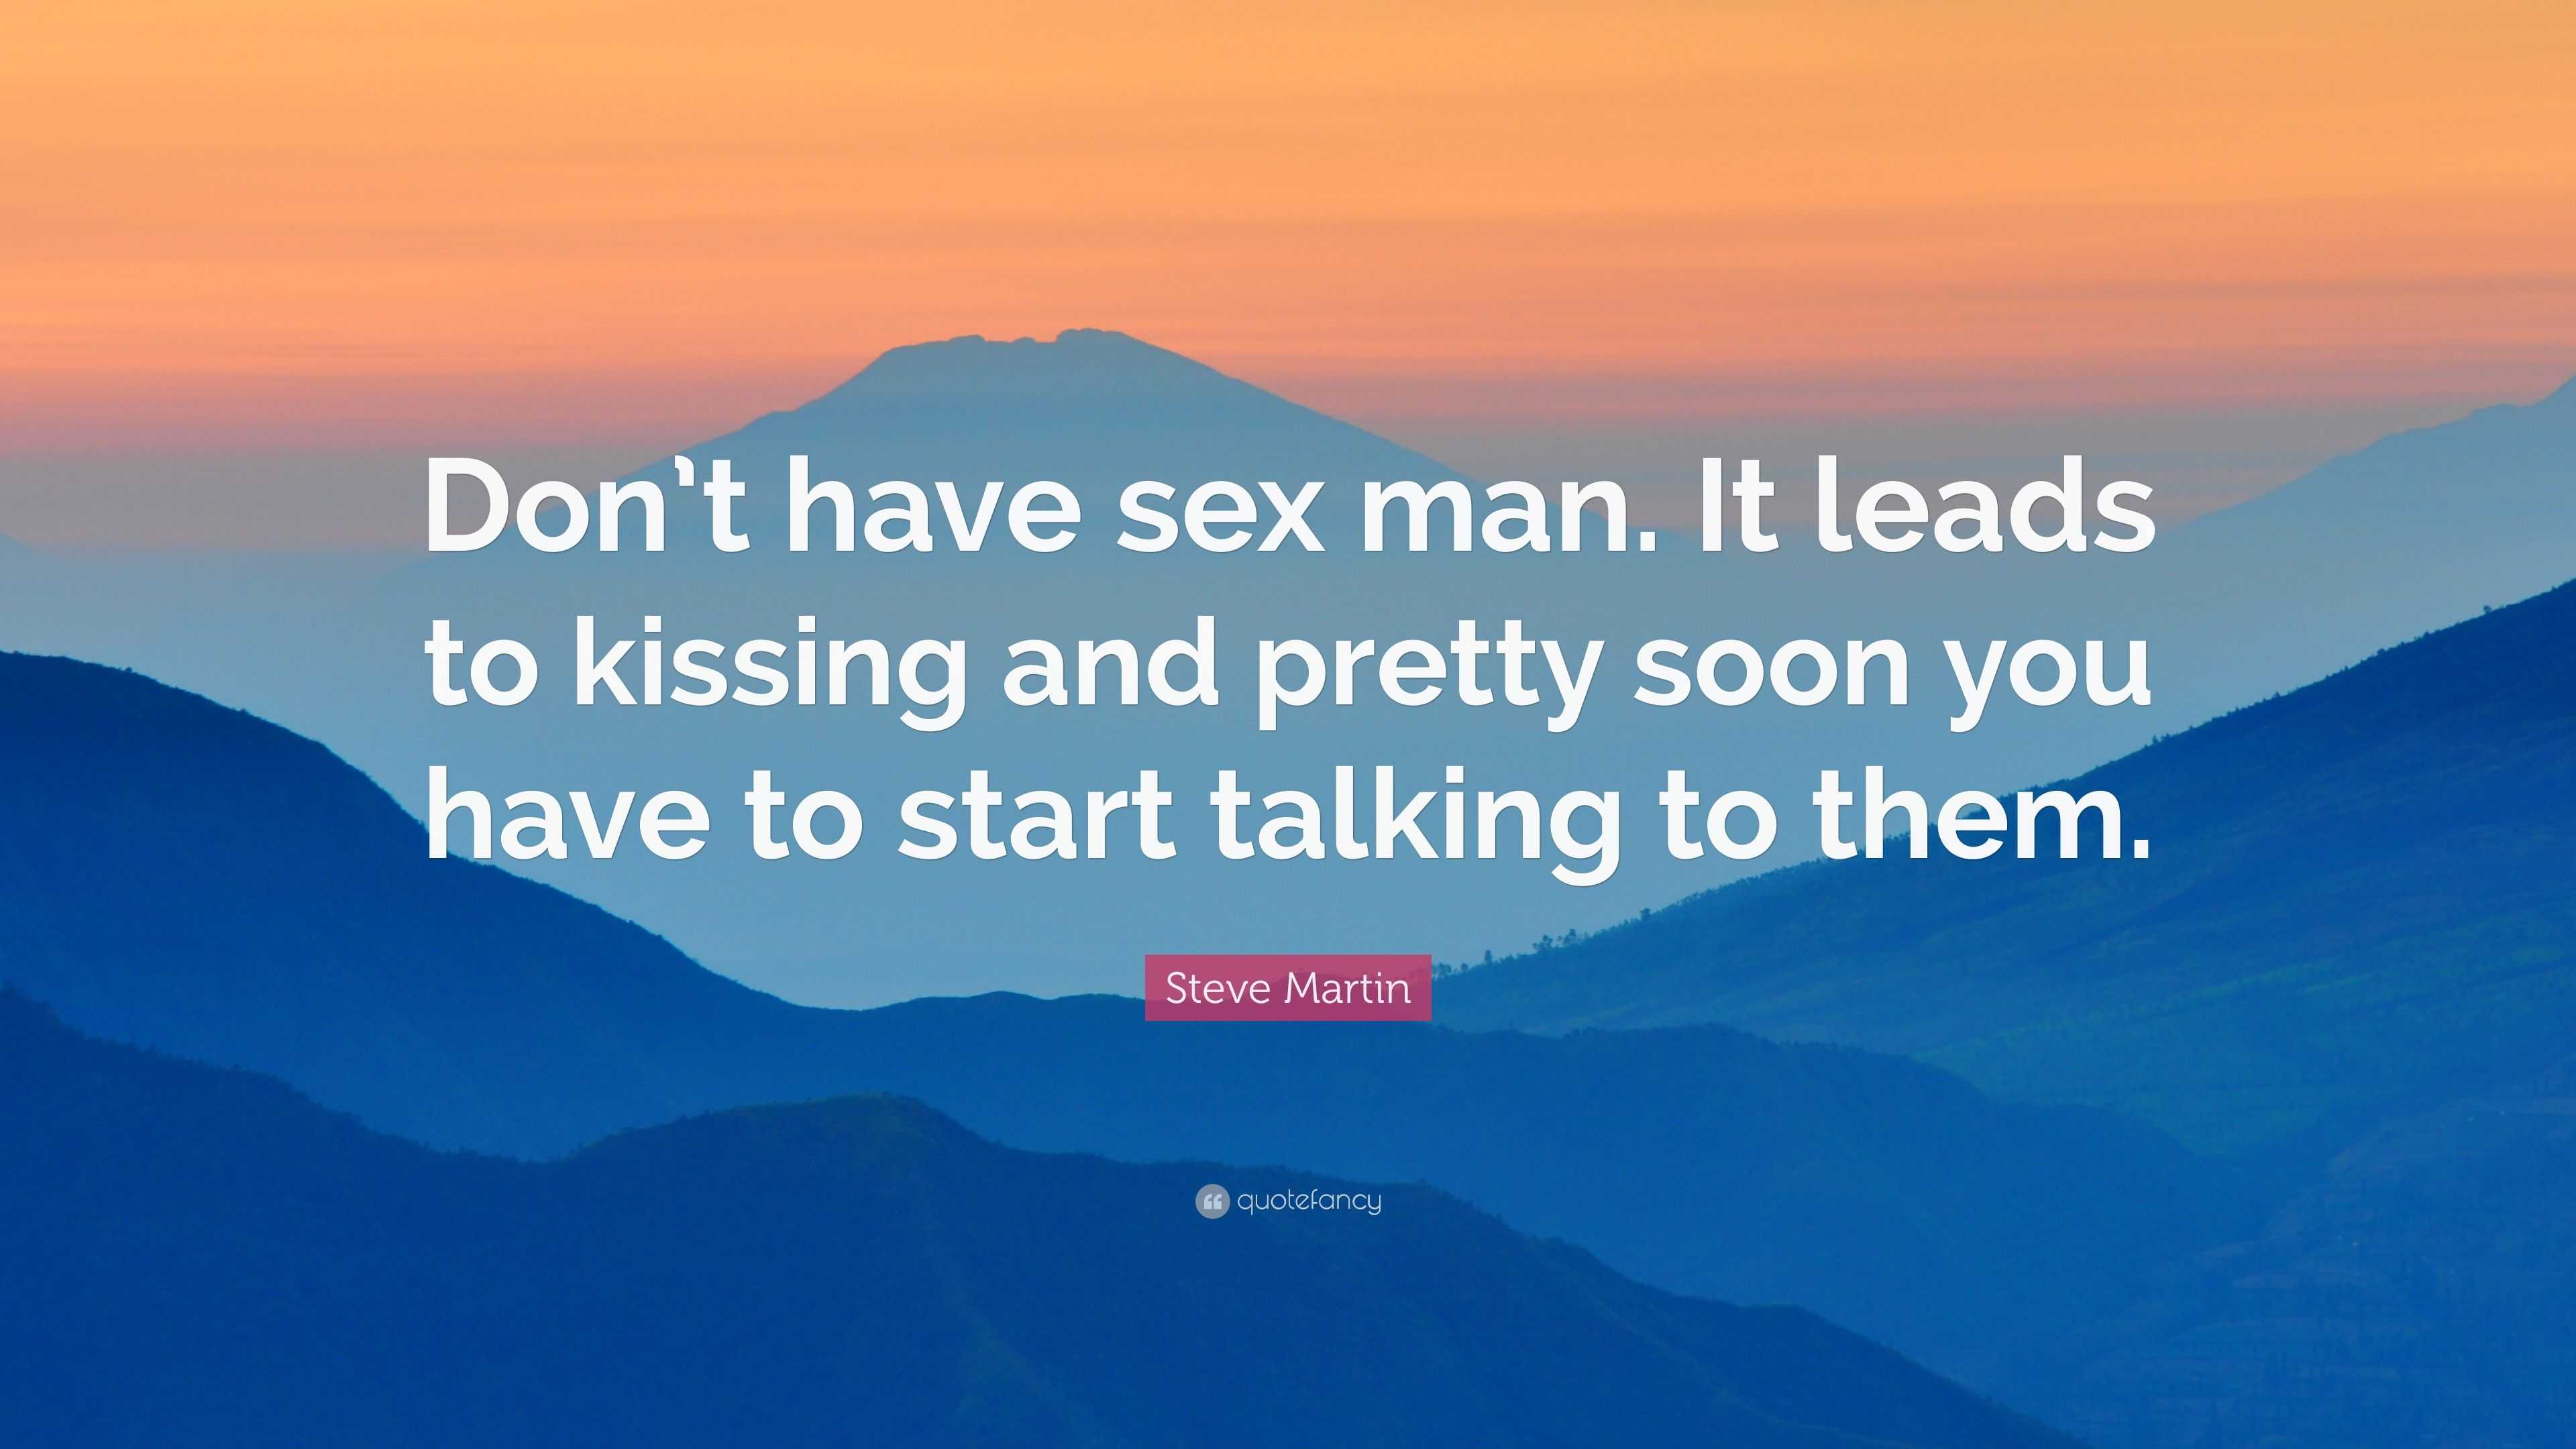 Steve Martin Quote “don’t Have Sex Man It Leads To Kissing And Pretty Soon You Have To Start